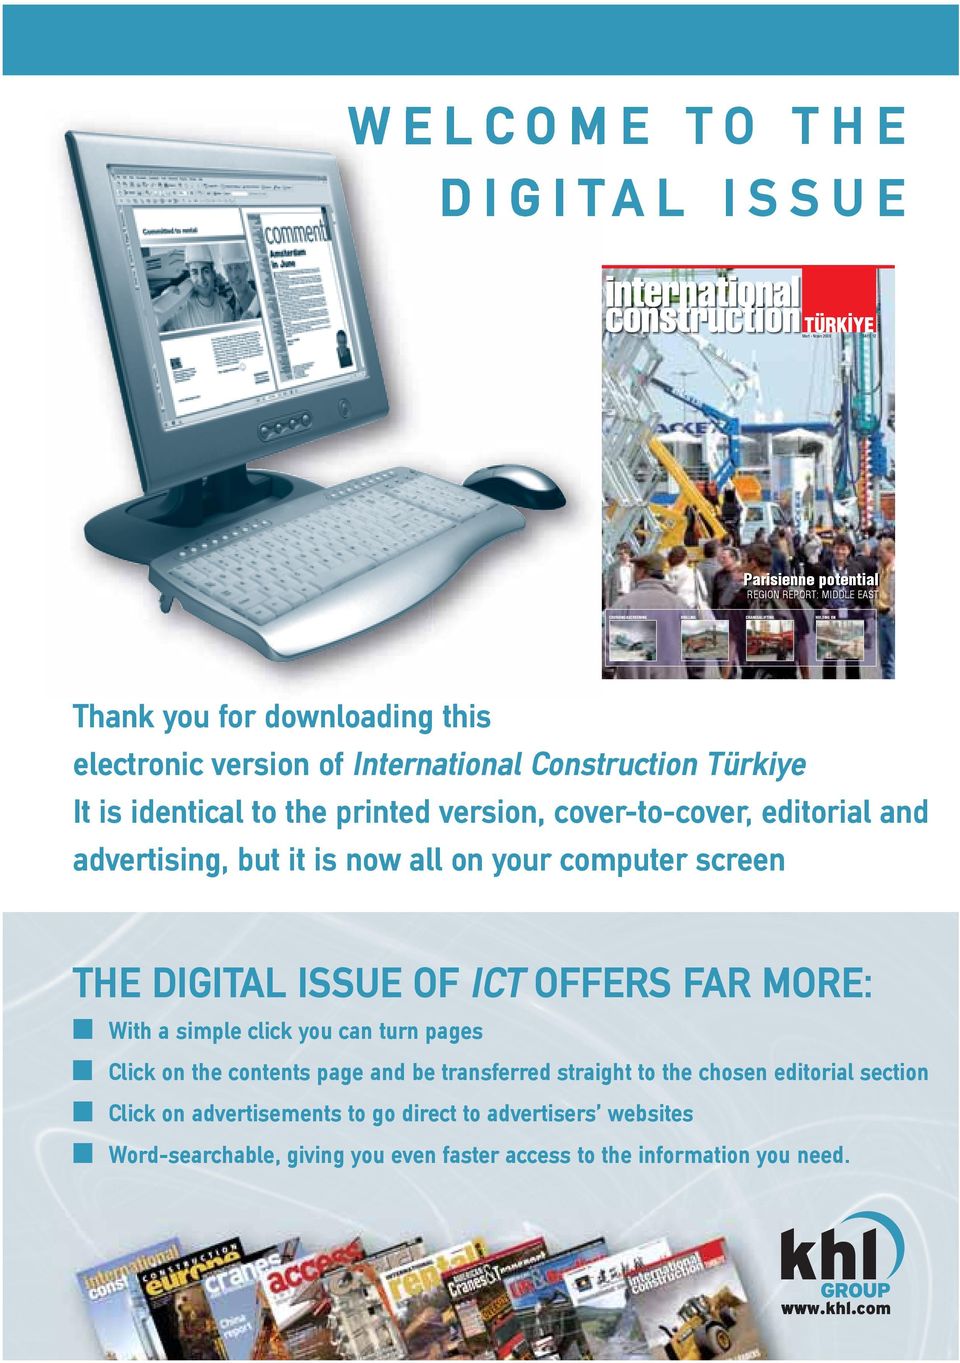 it is now all on your computer screen THE DIGITAL ISSUE OF ICT OFFERS FAR MORE: With a simple click you can turn pages Click on the contents page and be transferred straight